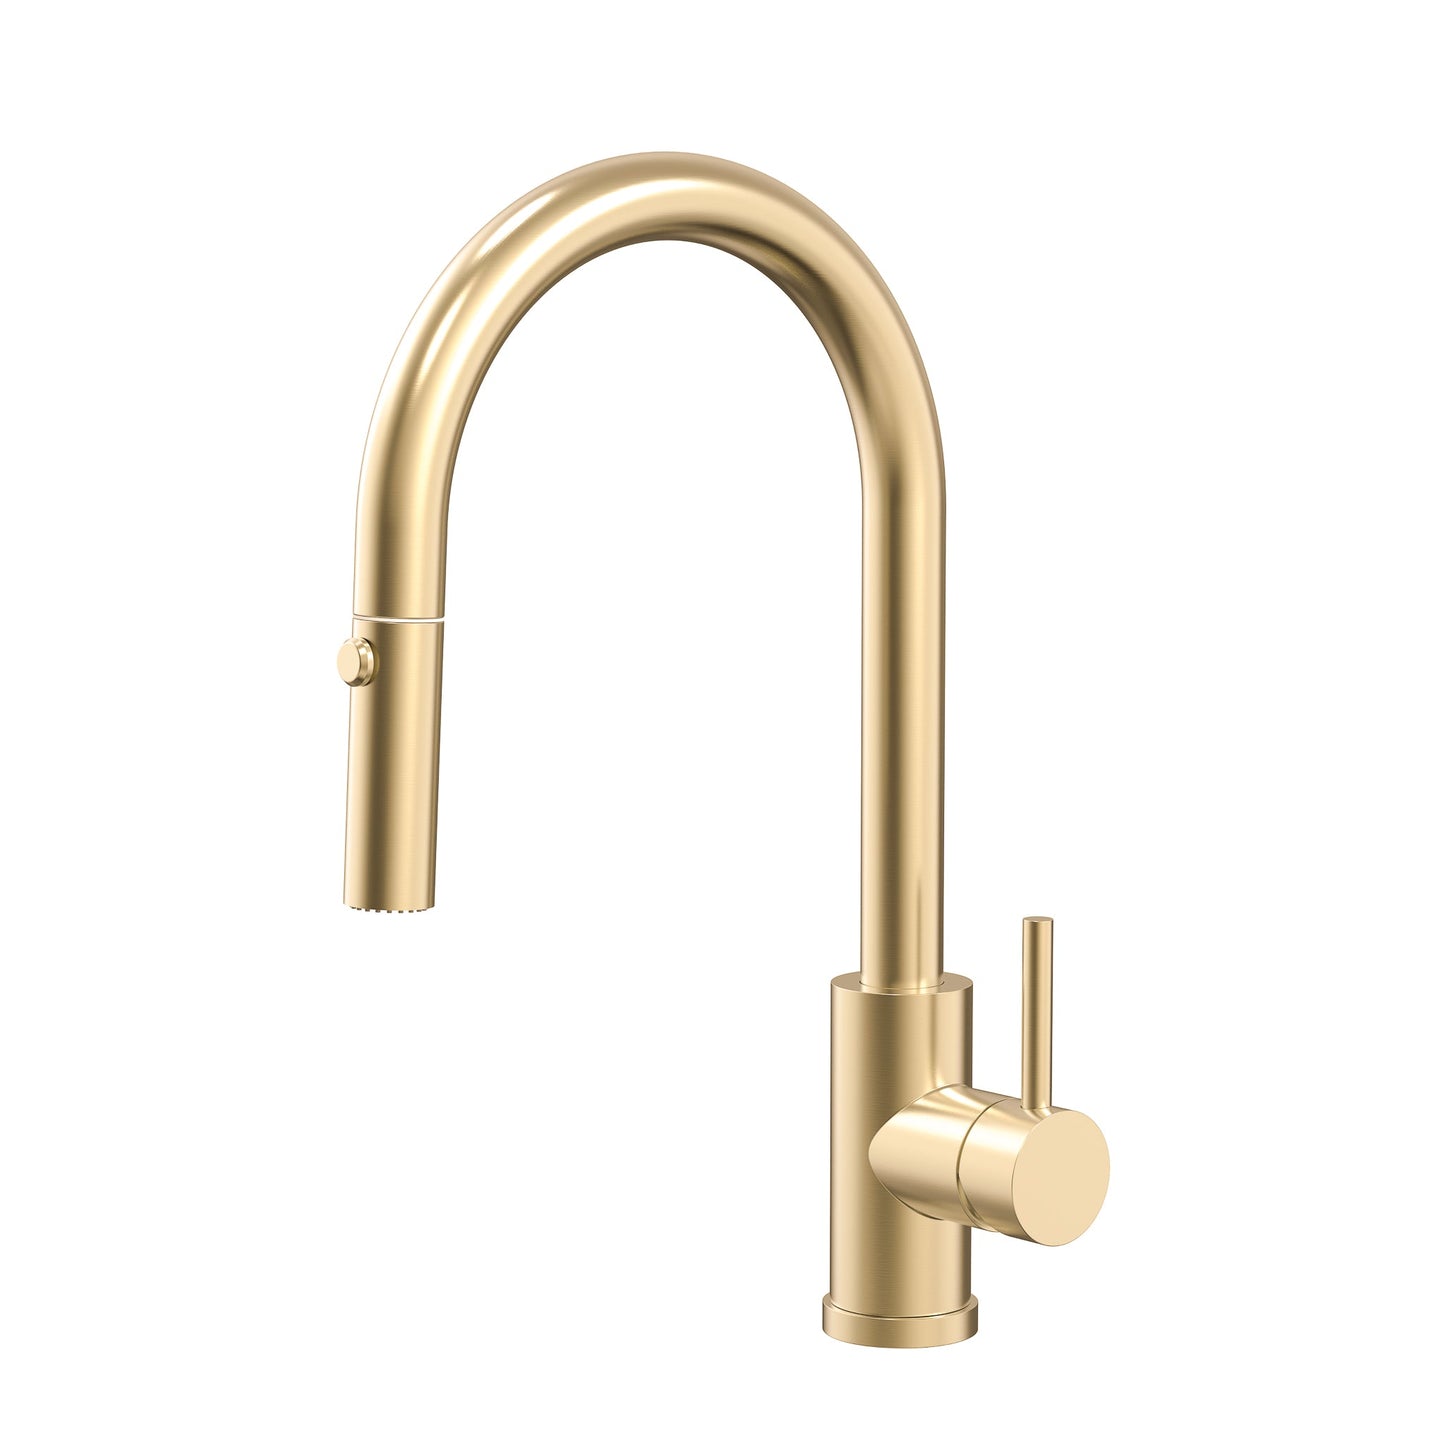 Profile III Gooseneck Kitchen Sink Mixer with Pull-Out, PVD Brushed Brass Gold